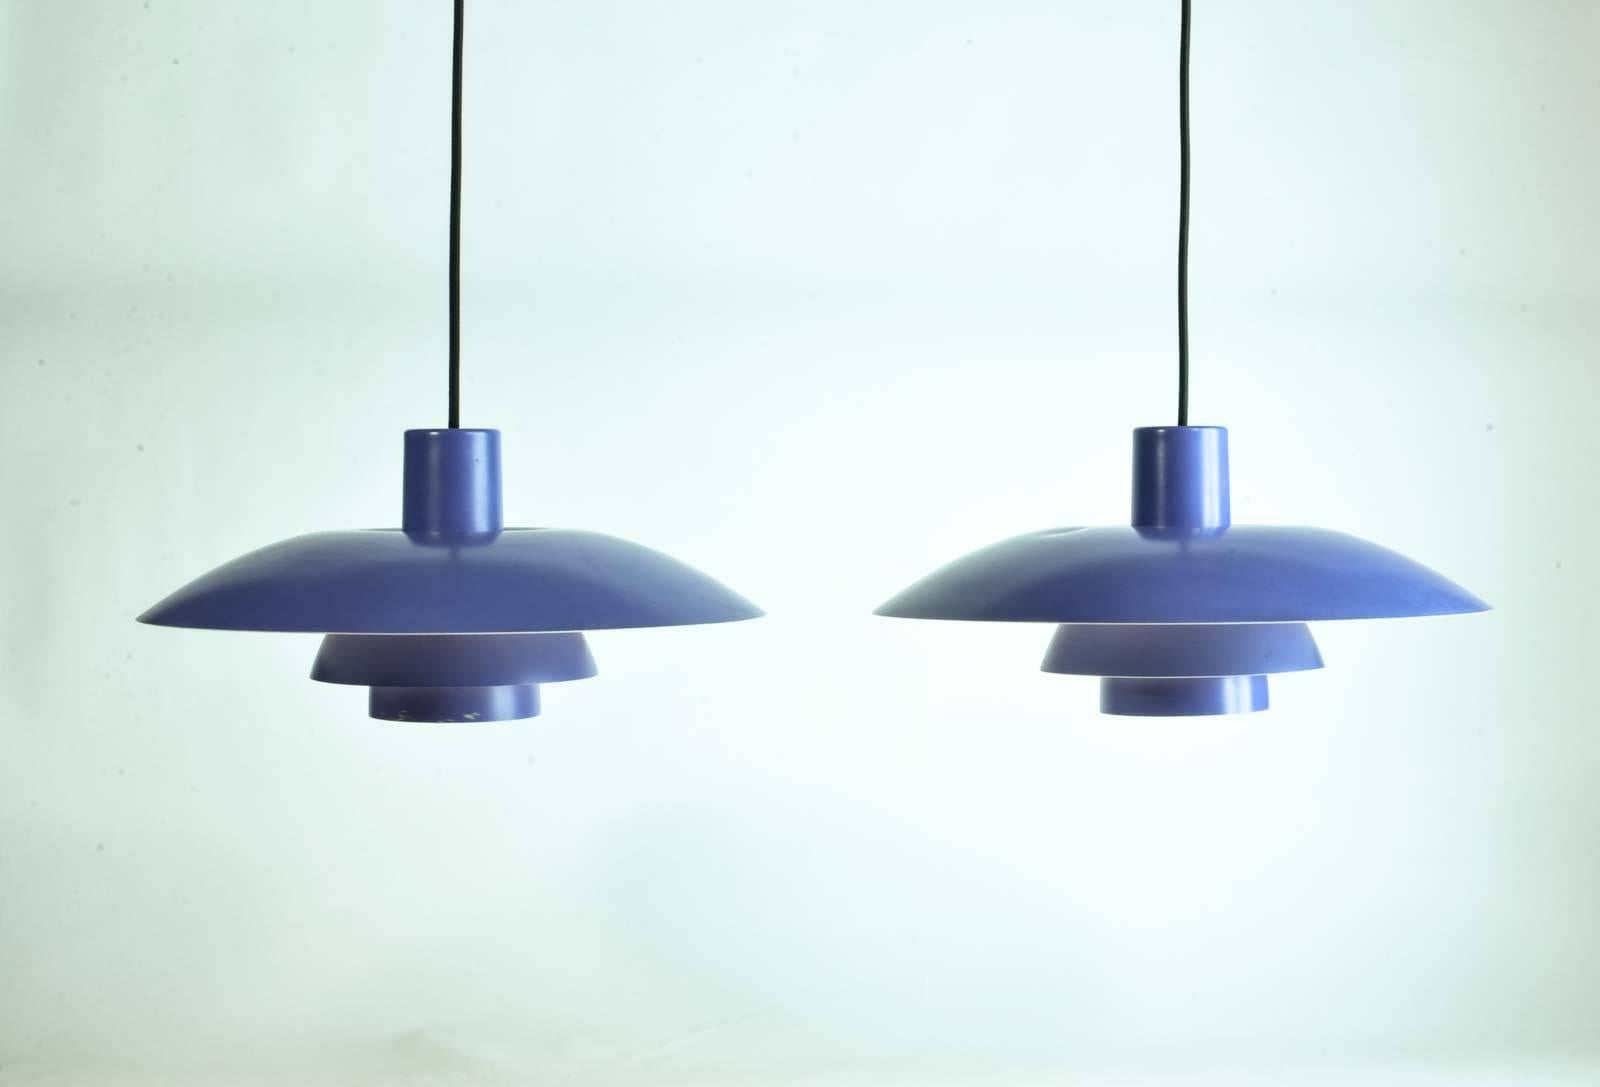 Poul Henningsen PH 4/3 Pendant for Louis Poulsen, Denmark. This model is executed in a refined lavender painted aluminium frame. This famous design stems from Henningsen's own, brilliant three-shade system. The pair is in a very well preserved